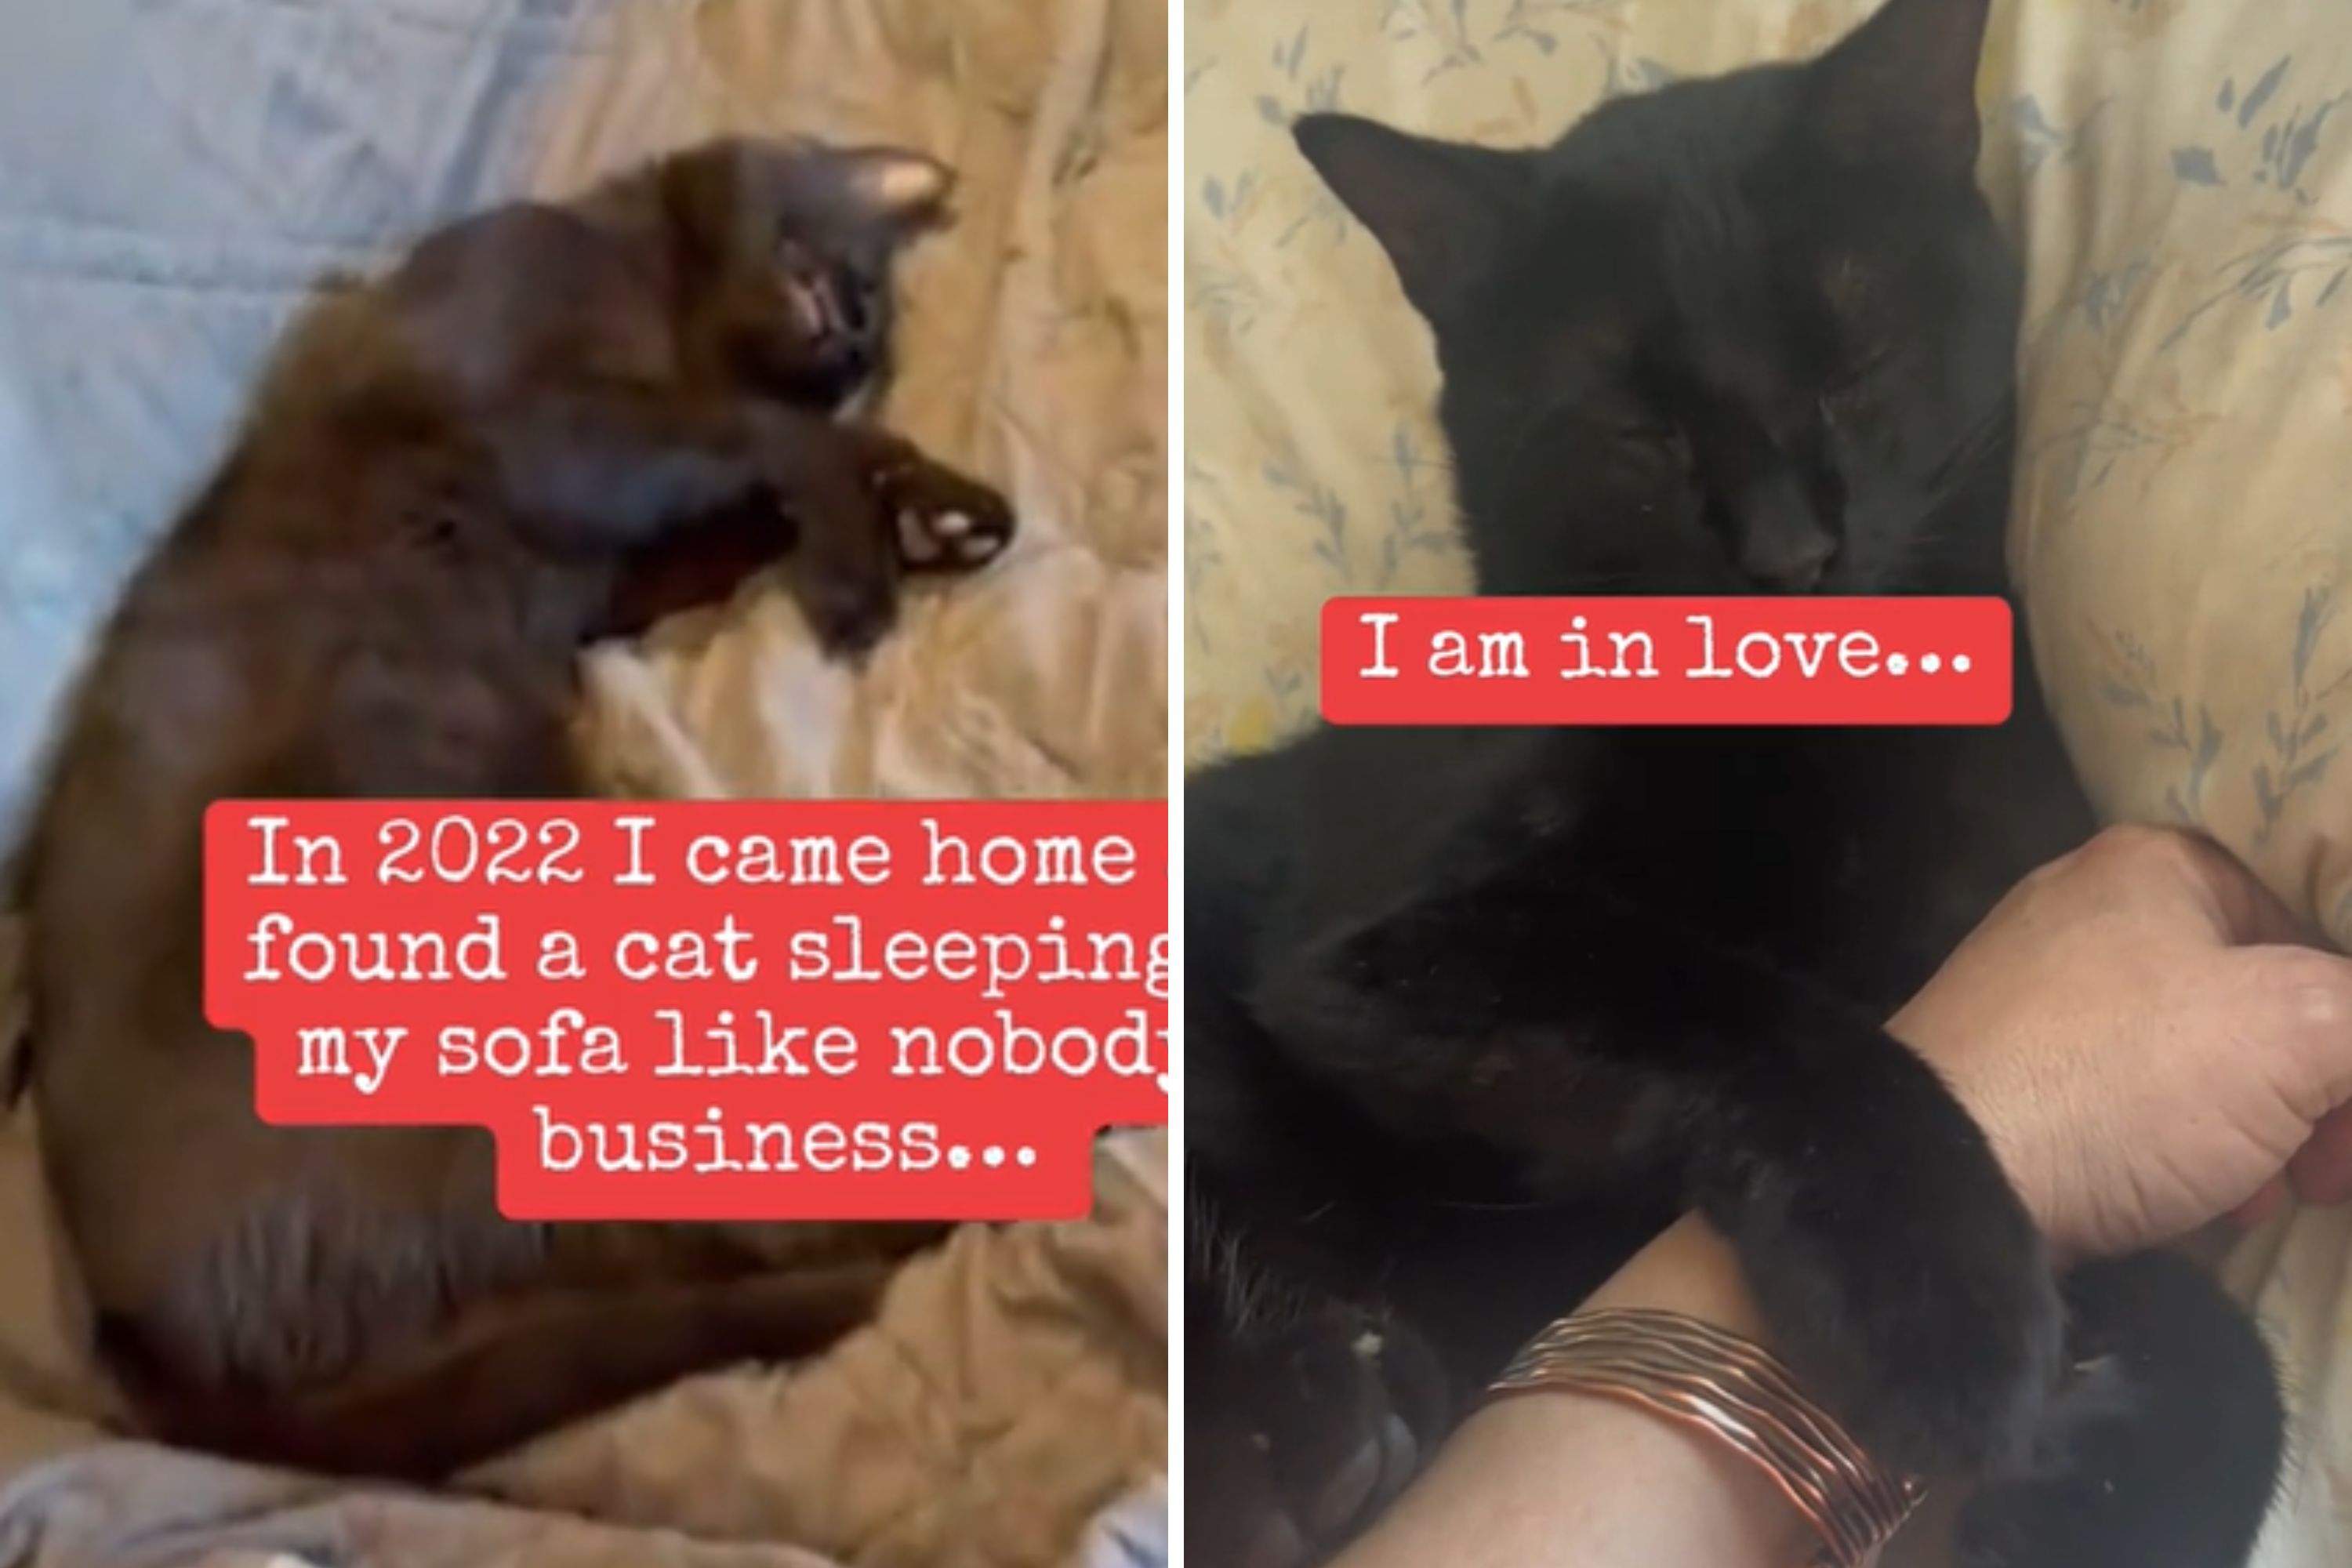 Family Comes Home to Find Black Cat Lying on Sofa, but There's a Problem